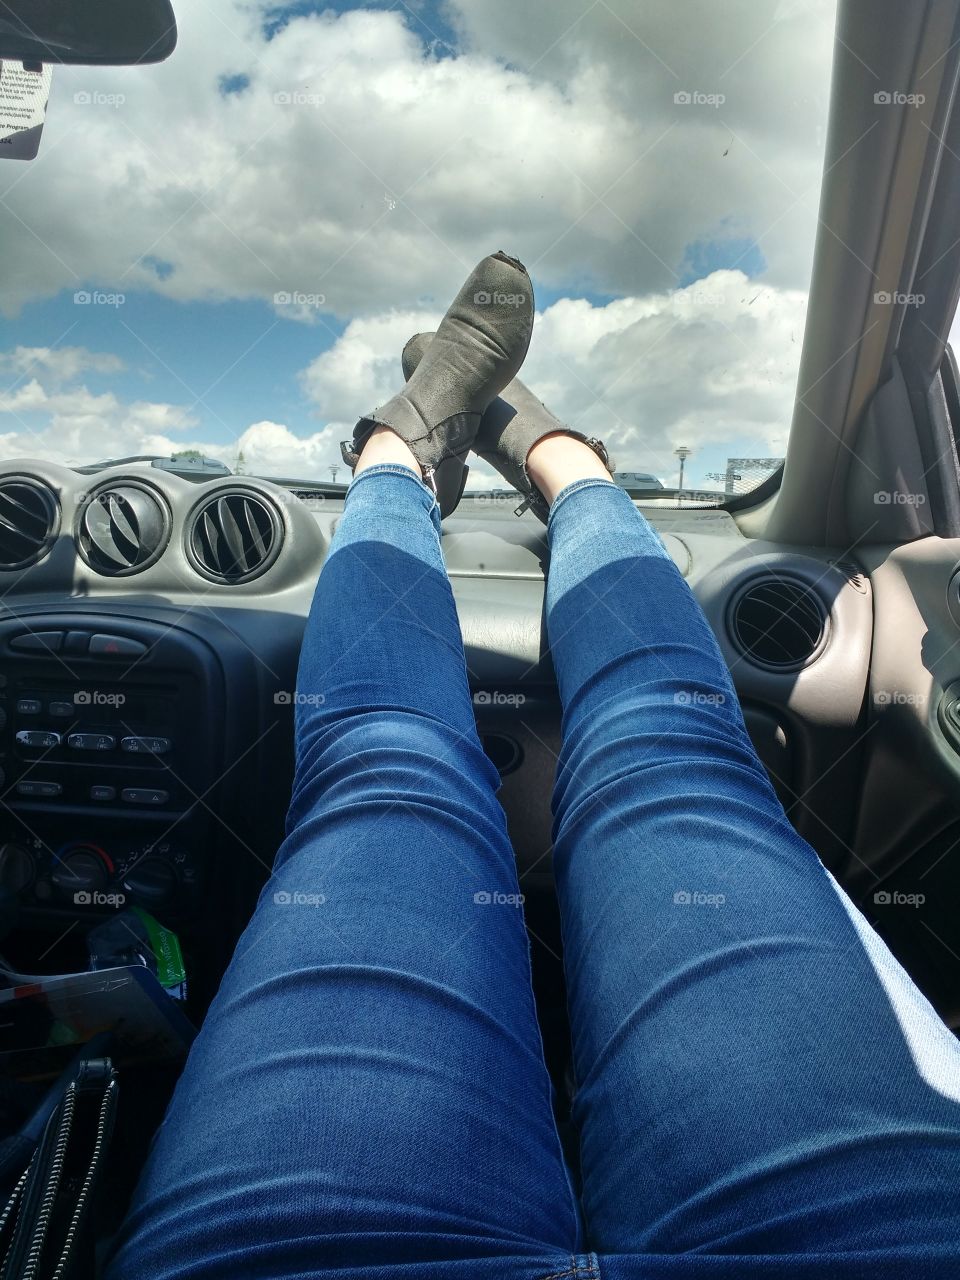 Waiting in the Car